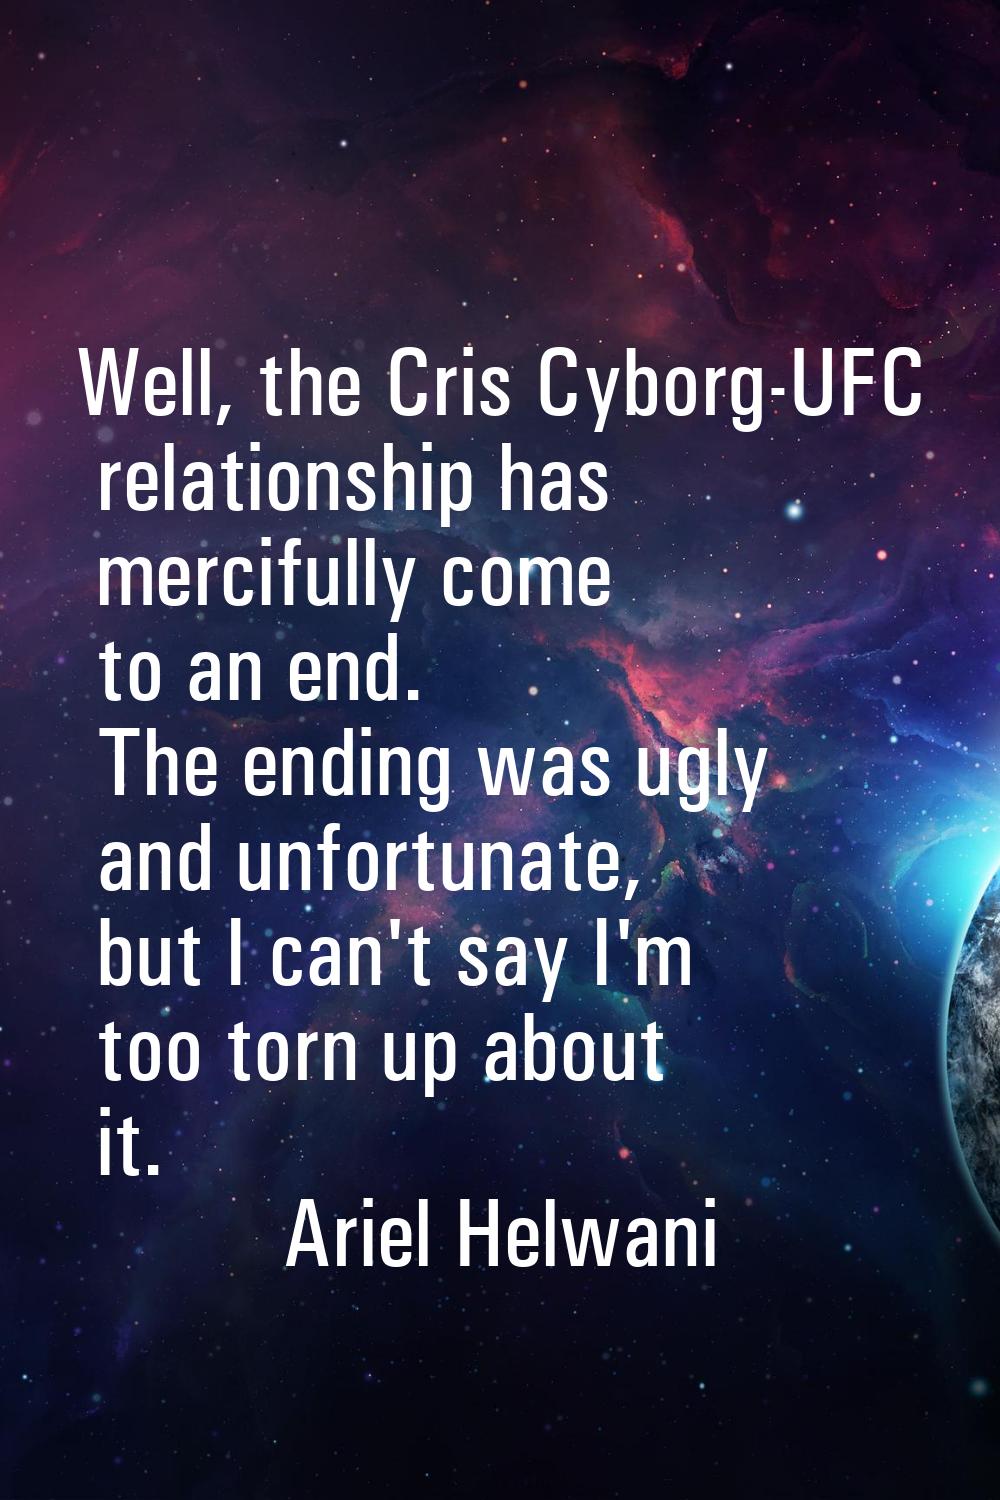 Well, the Cris Cyborg-UFC relationship has mercifully come to an end. The ending was ugly and unfor